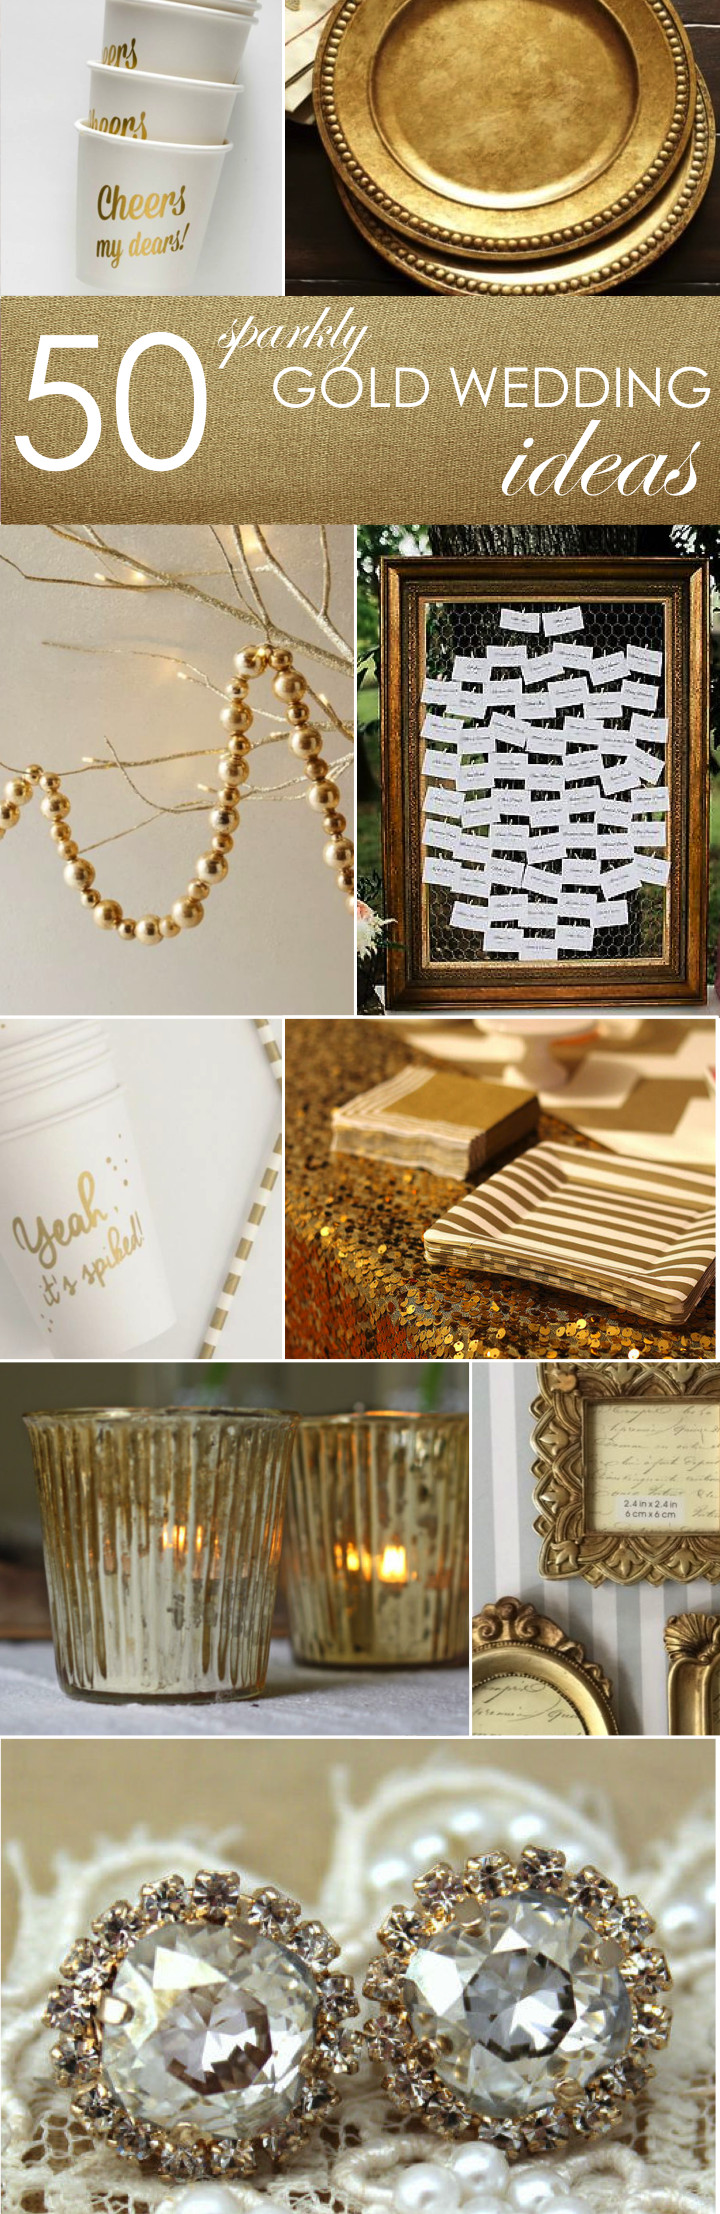 Gold Wedding Anniversary Gift Ideas
 50 Gold Ideas for Weddings Parties